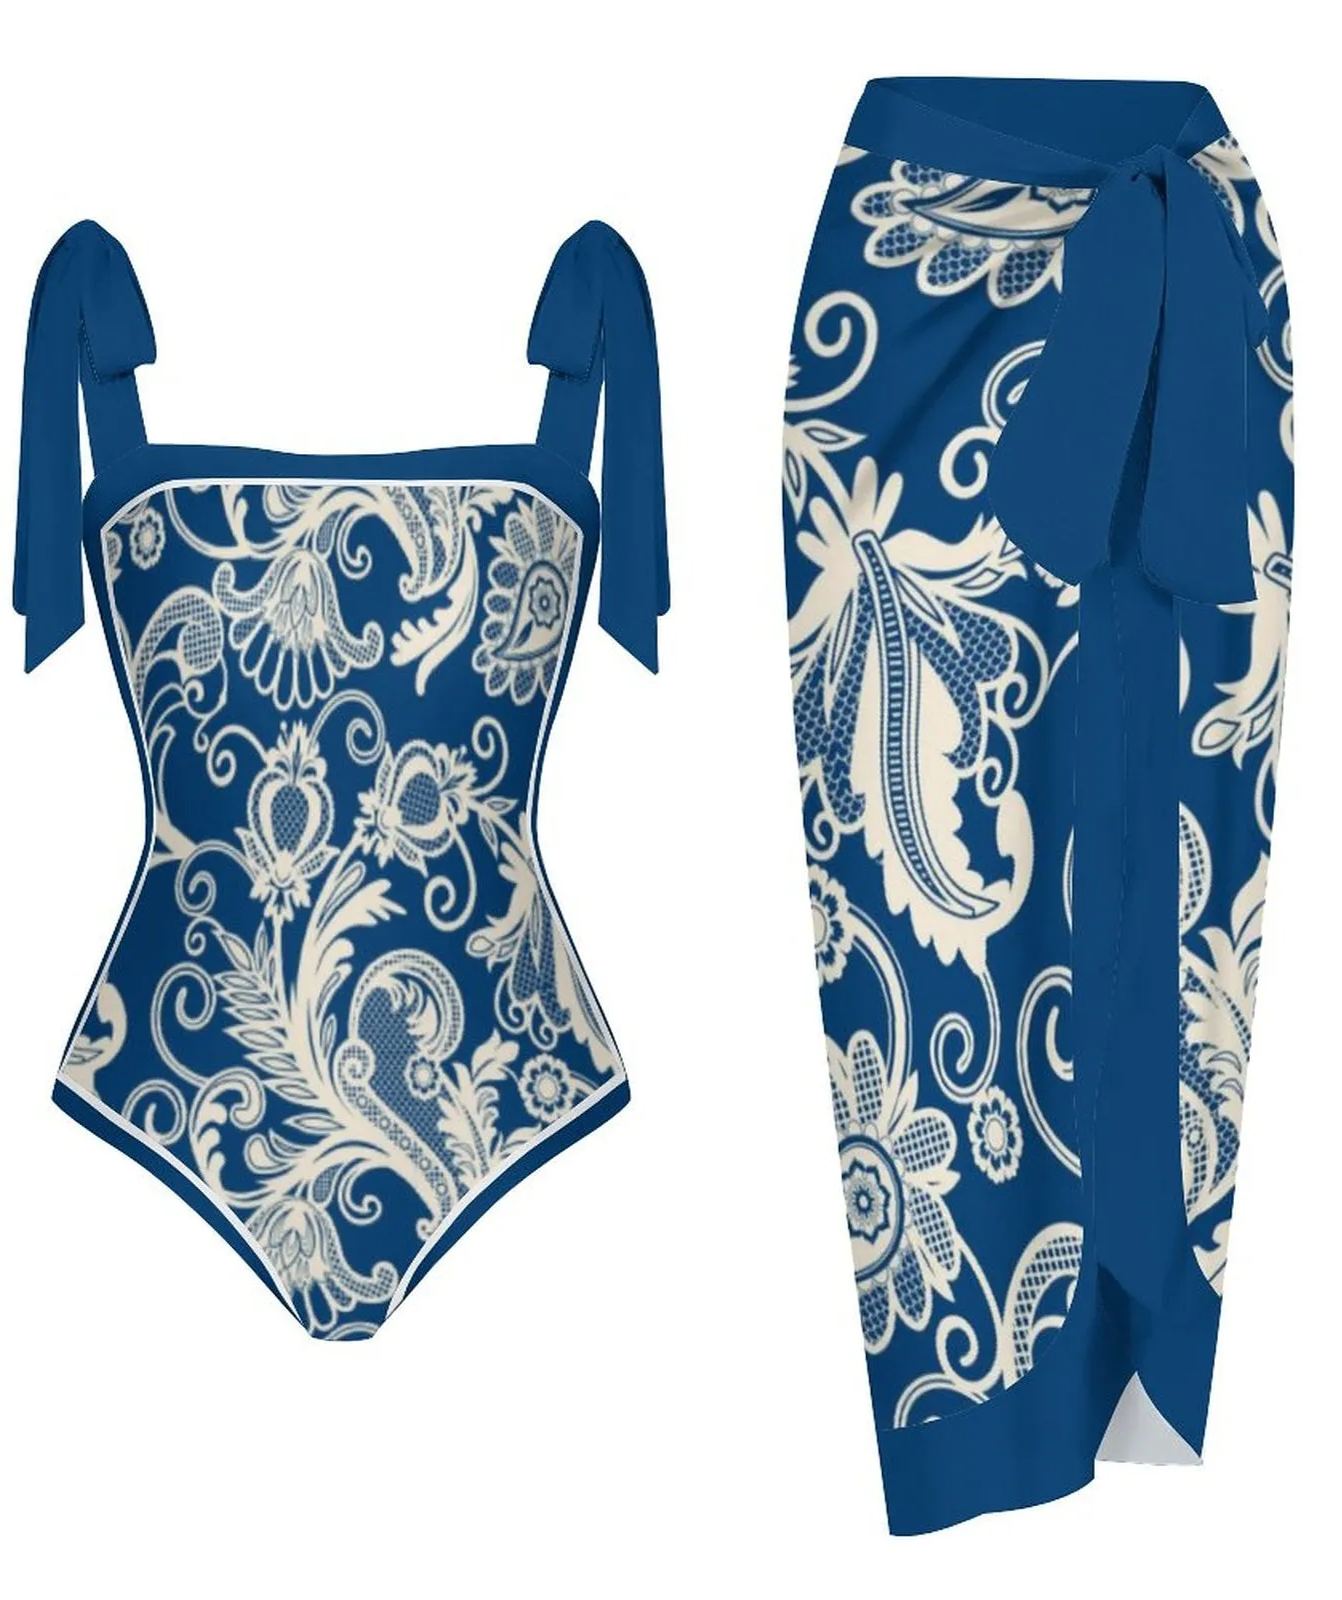 Fashion Printed One Piece Swimsuit And Cover Up 2305104538